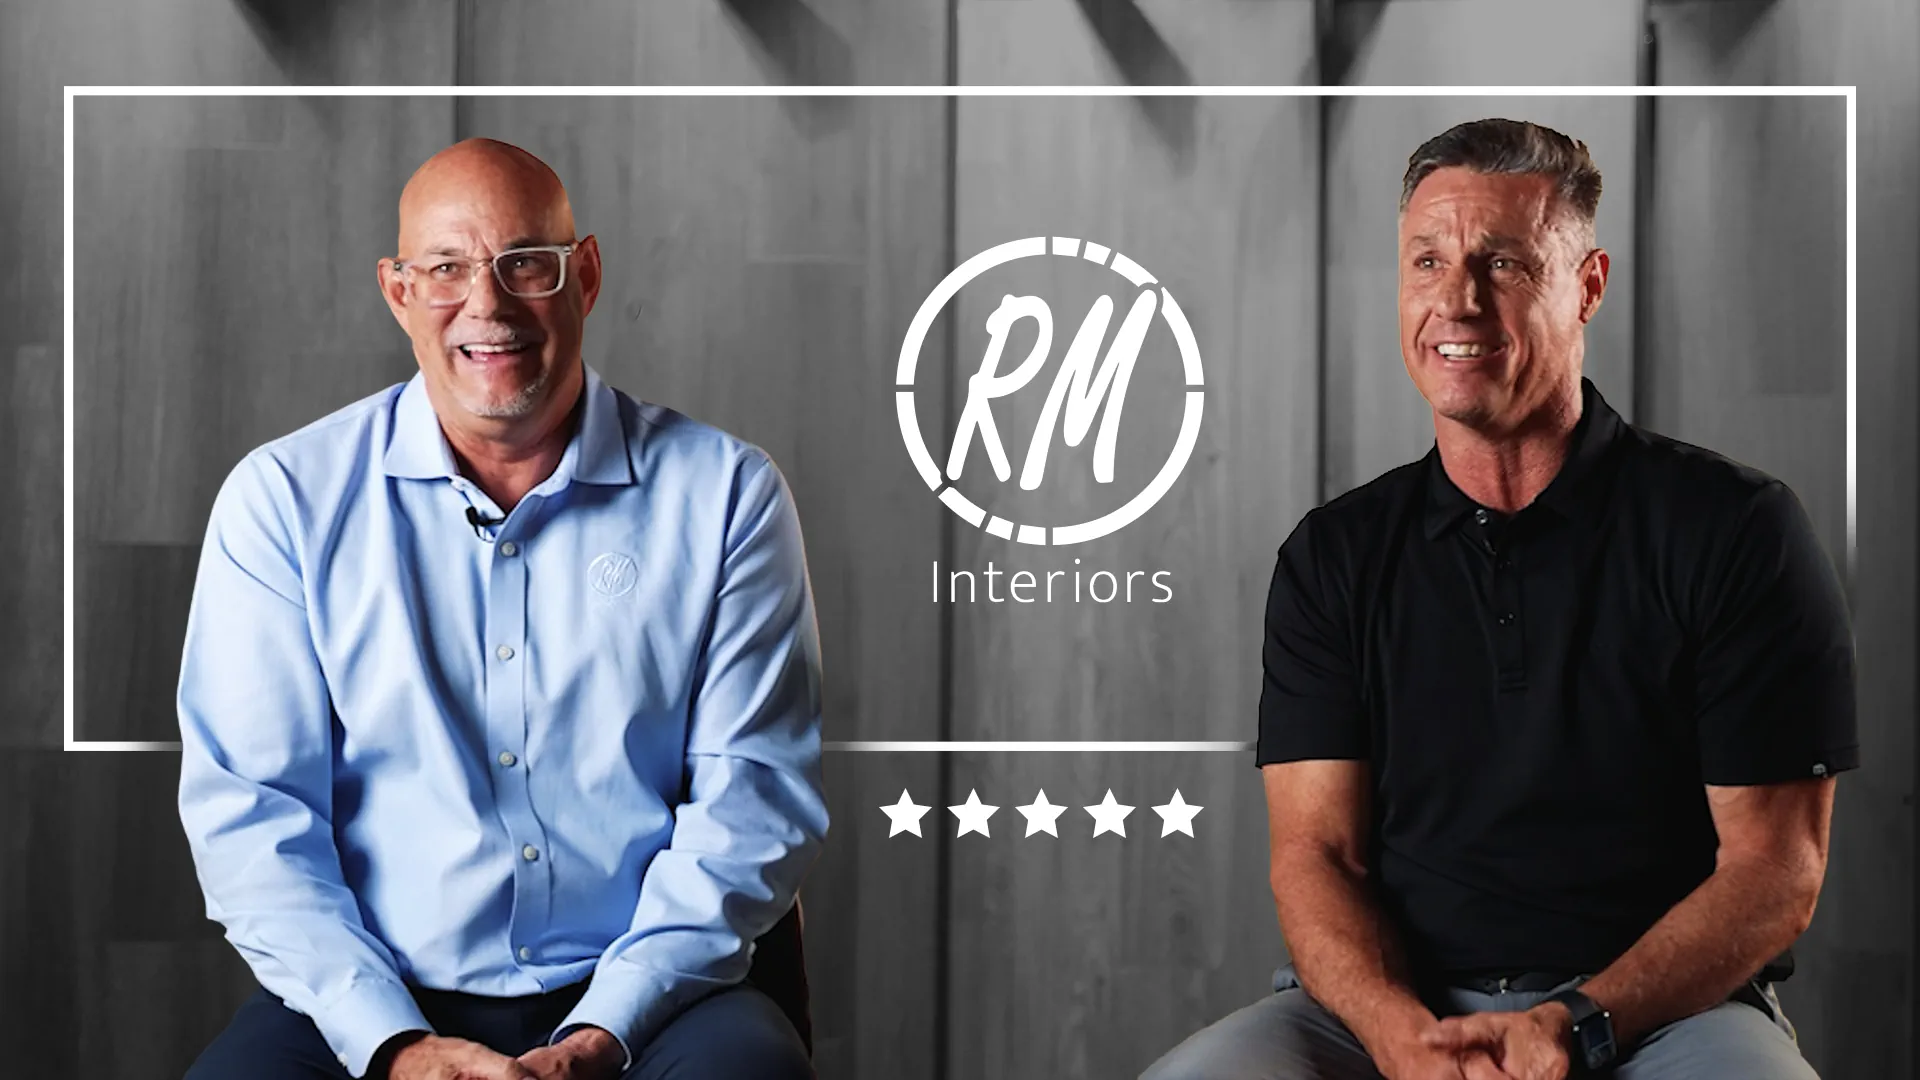 Rick Wagner and Mark Wagner of RM Interiors sitting down to give a five-star review for Urban Surfaces.